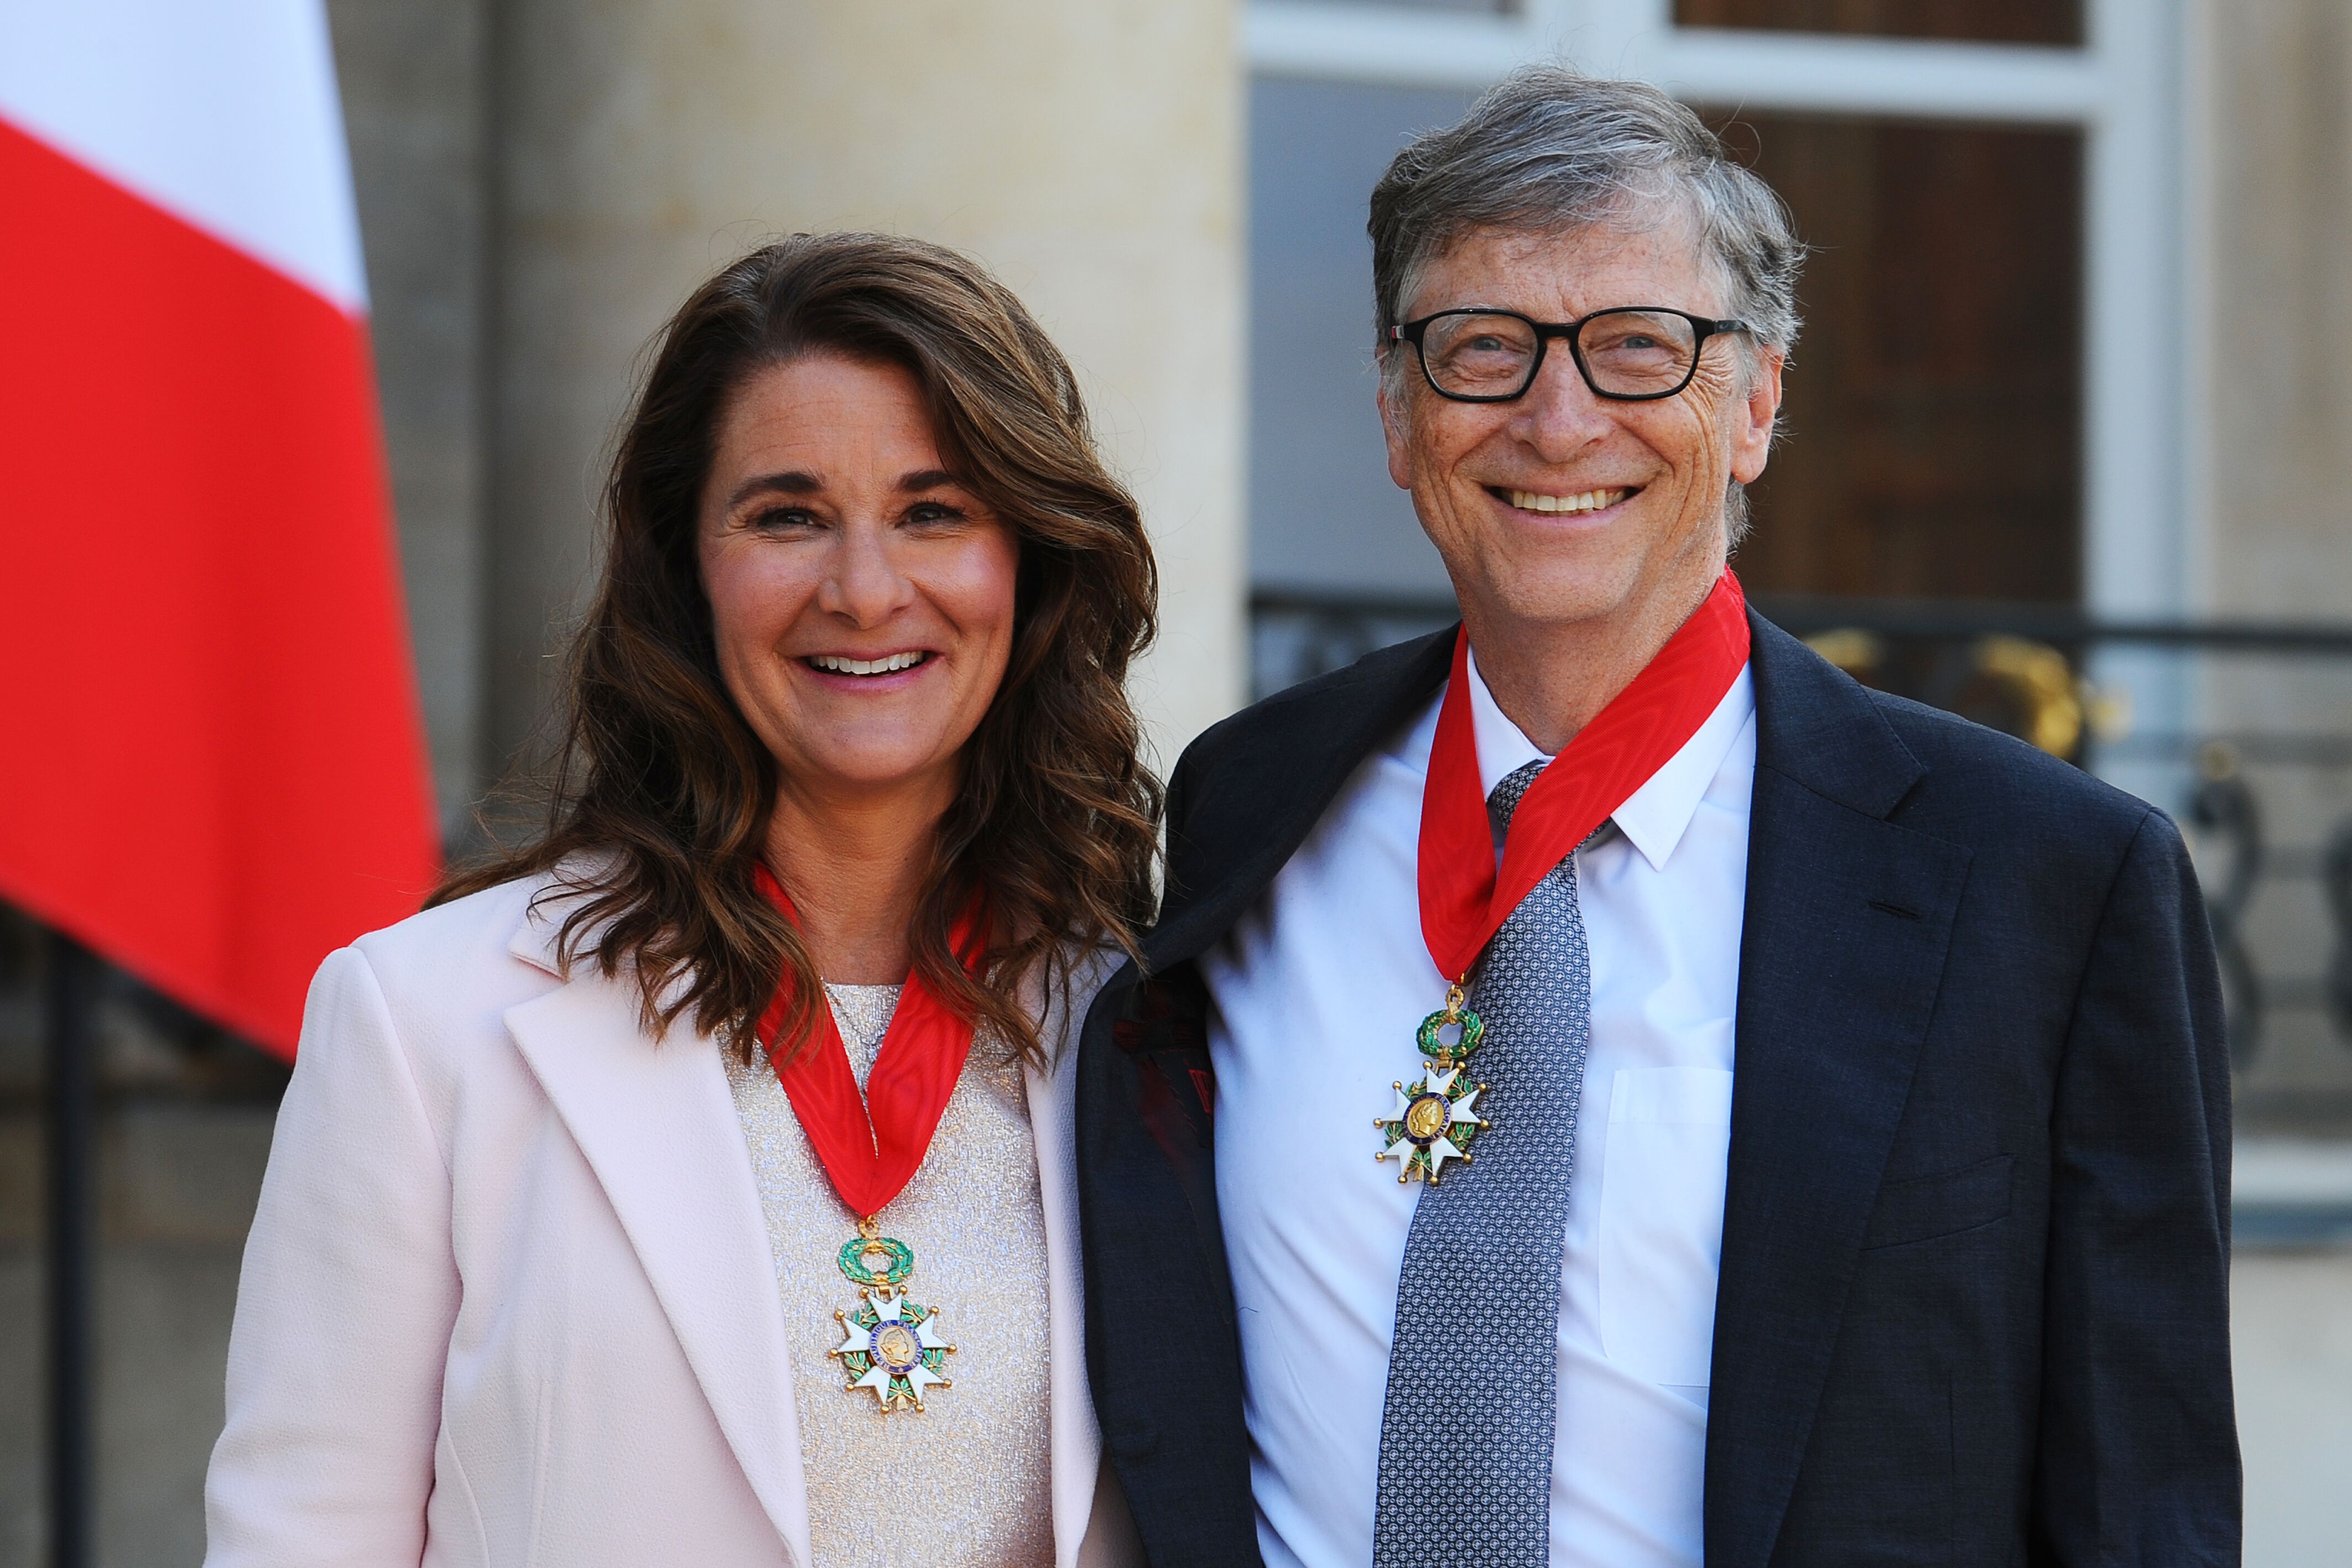 Bill and Melinda Gates pose in front of the Elysee Palace after receiving the award of Commander of the Legion of Honor by French President Francois Hollande on April 21, 2017 in Paris, France | Photo: Getty Images